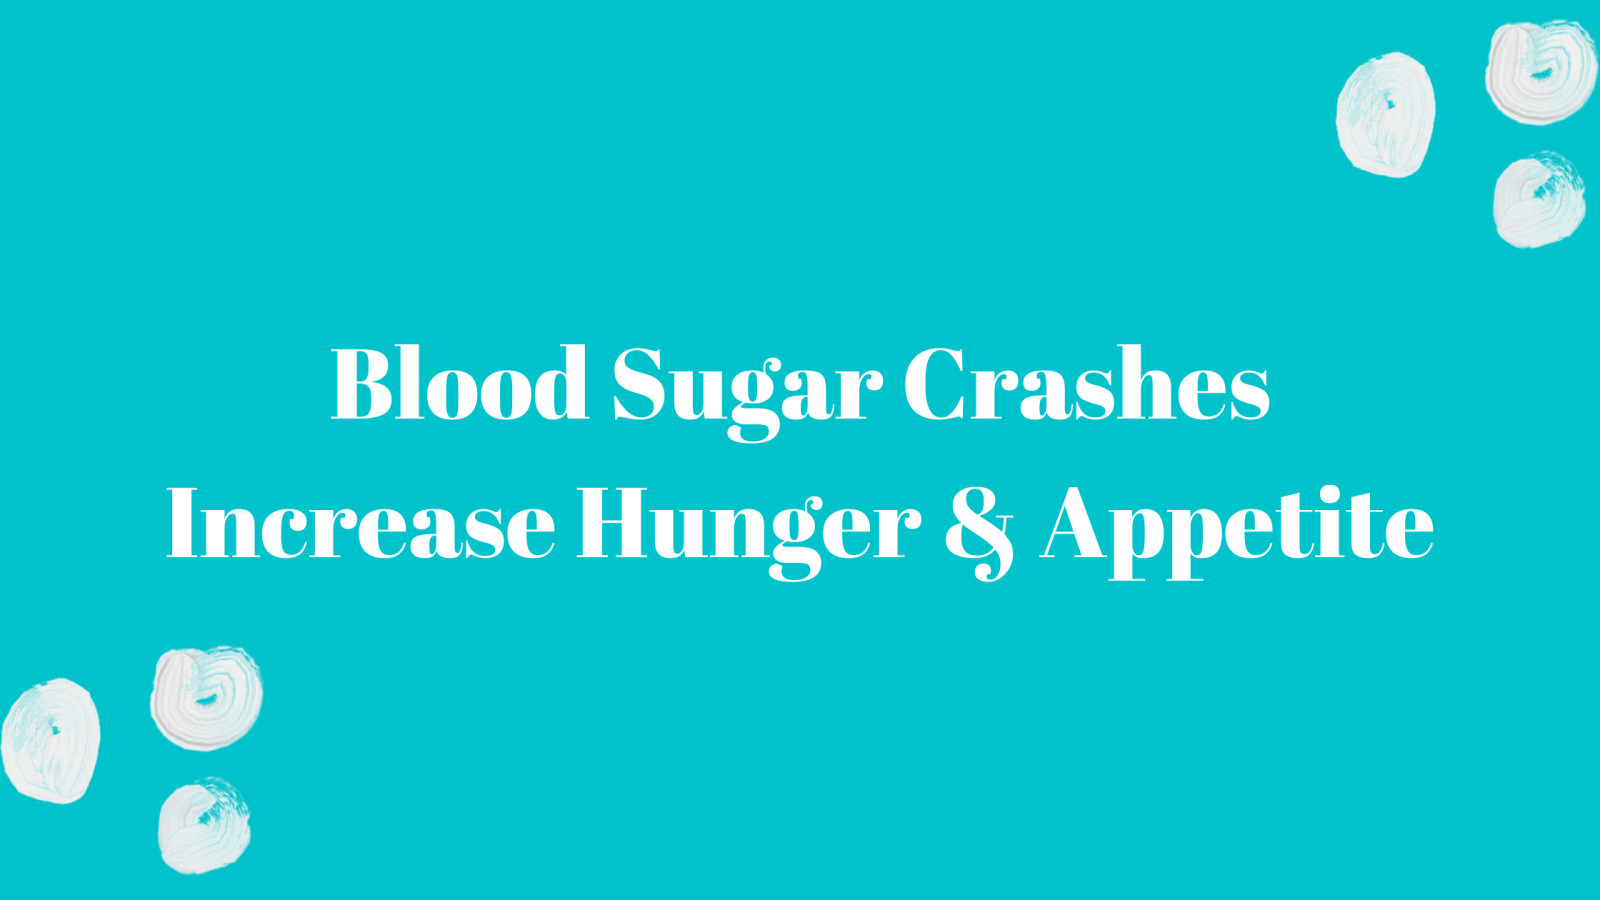 Hunger Increases with Blood Sugar Crashes